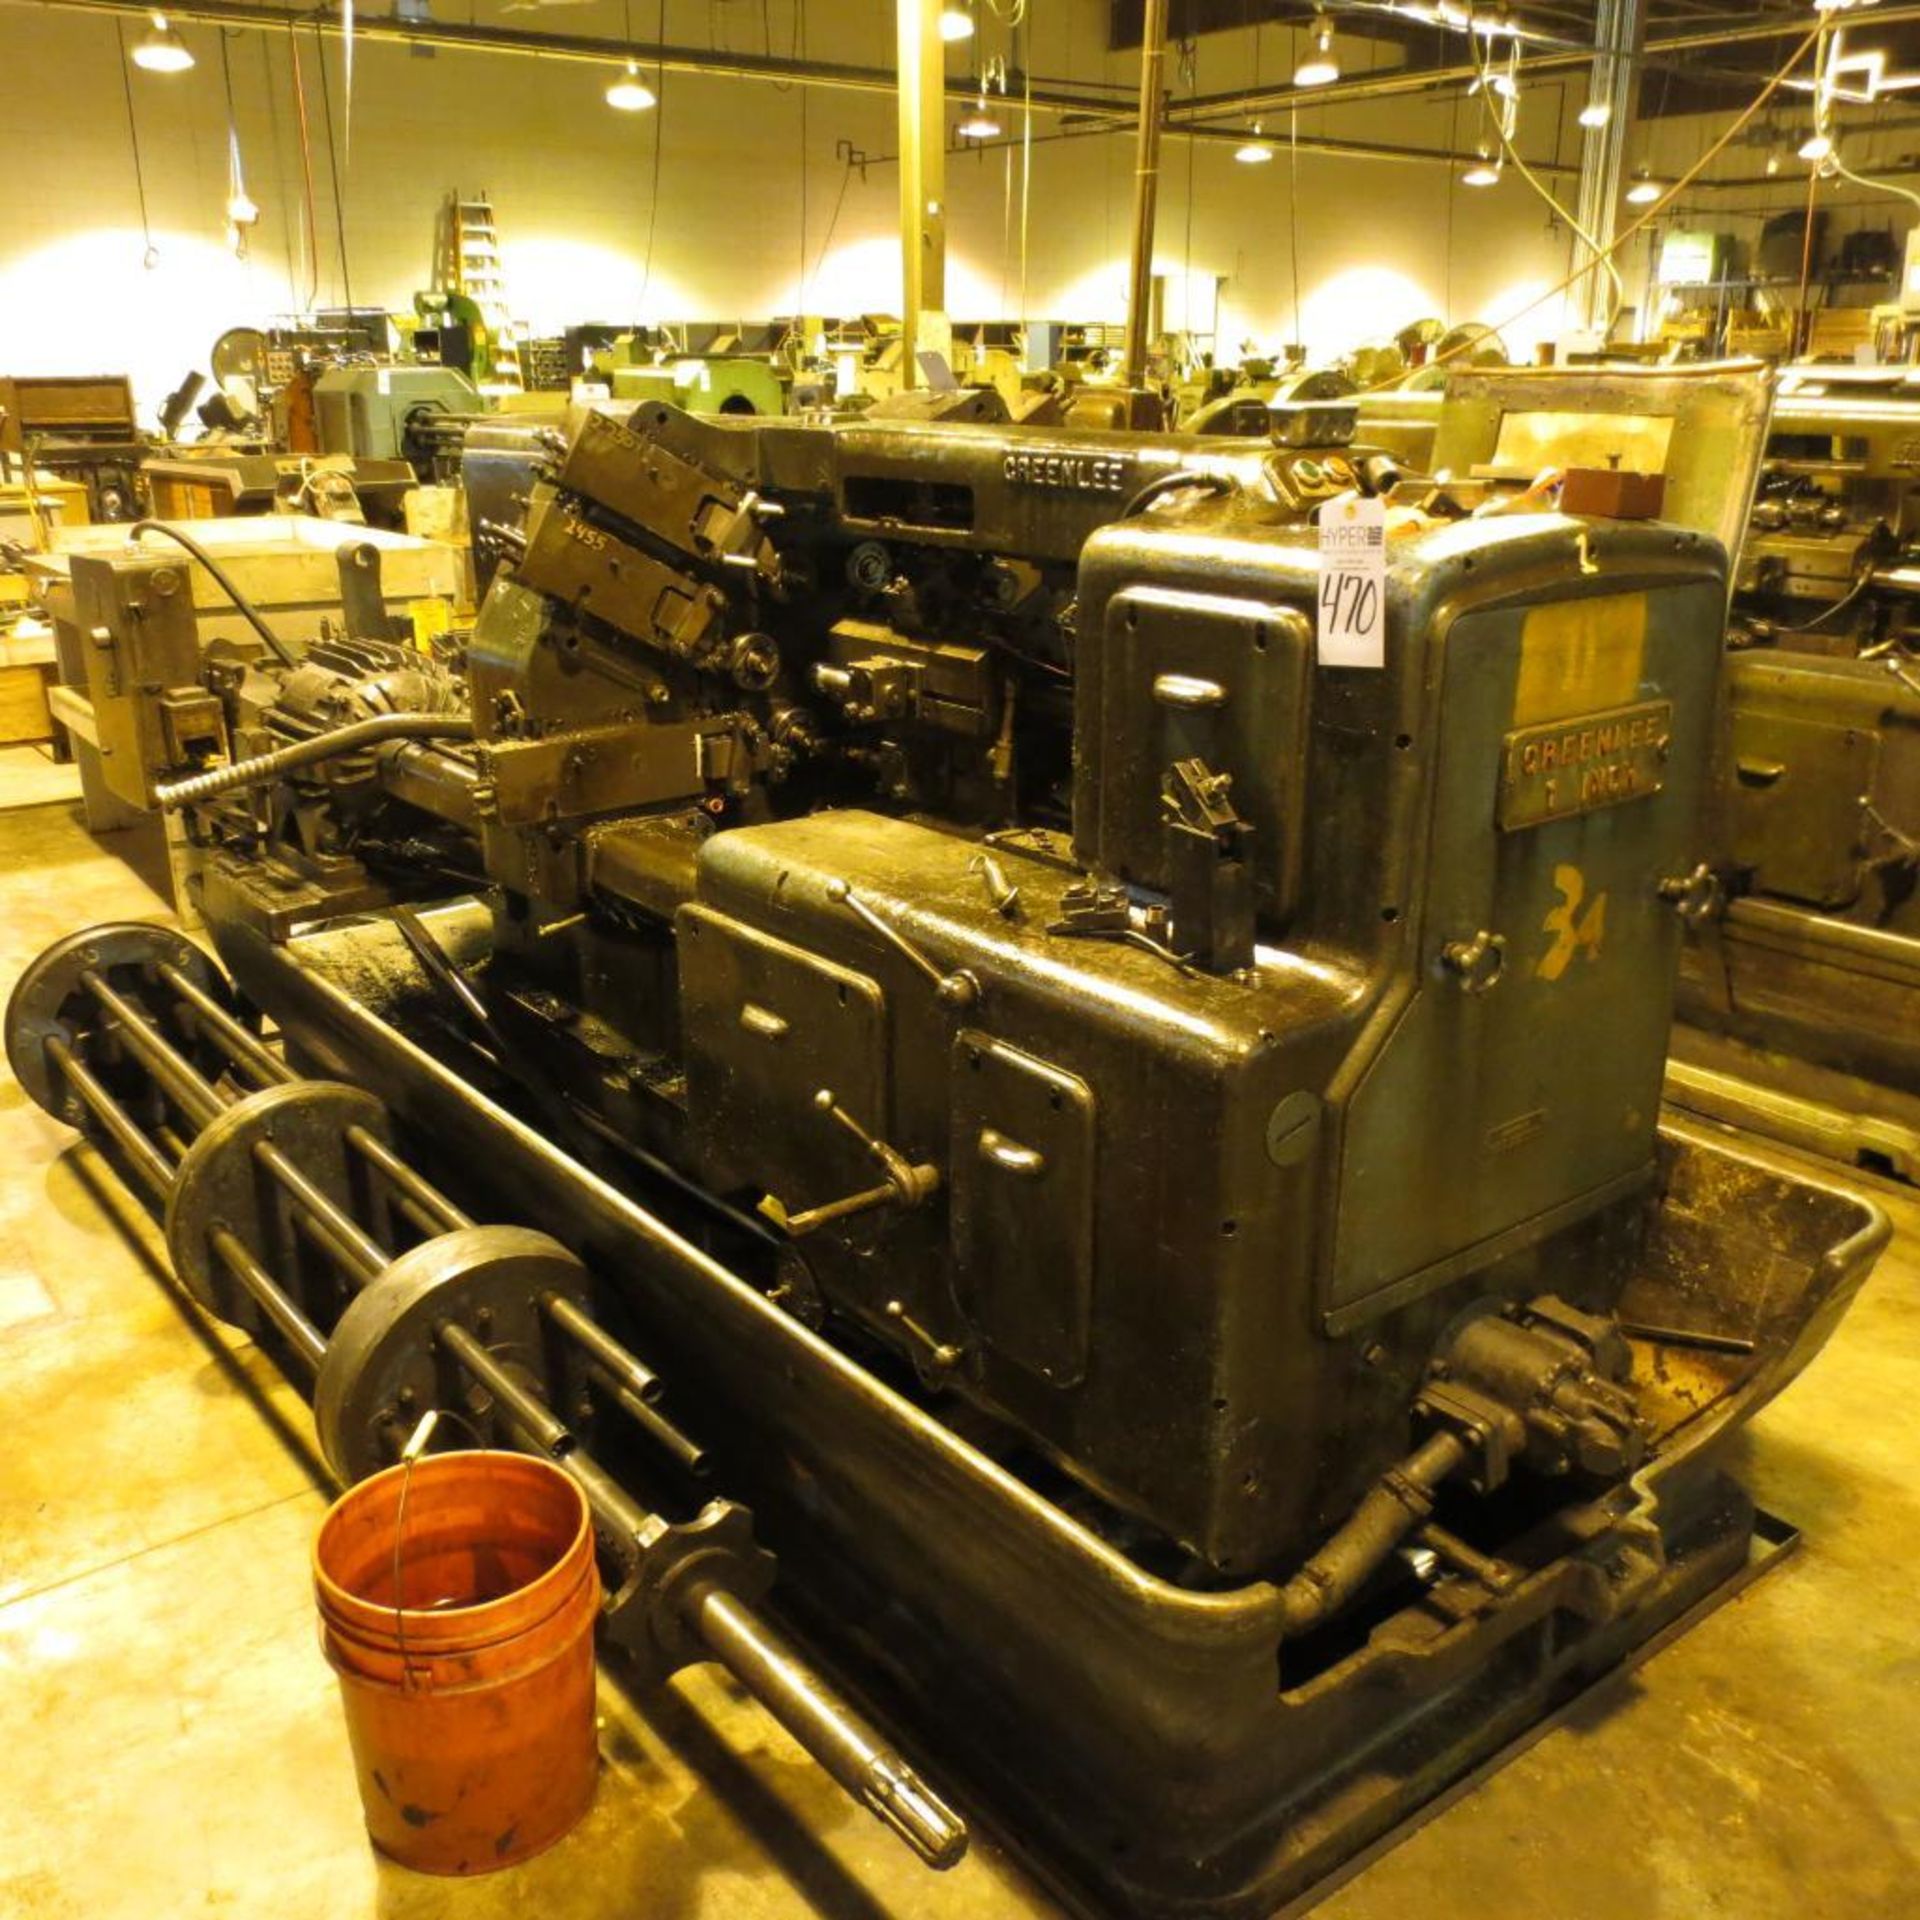 Greenlee 1"Multi Spindle Automatic Screw Machine S/N A-1378, Threading *RIGGING $500*